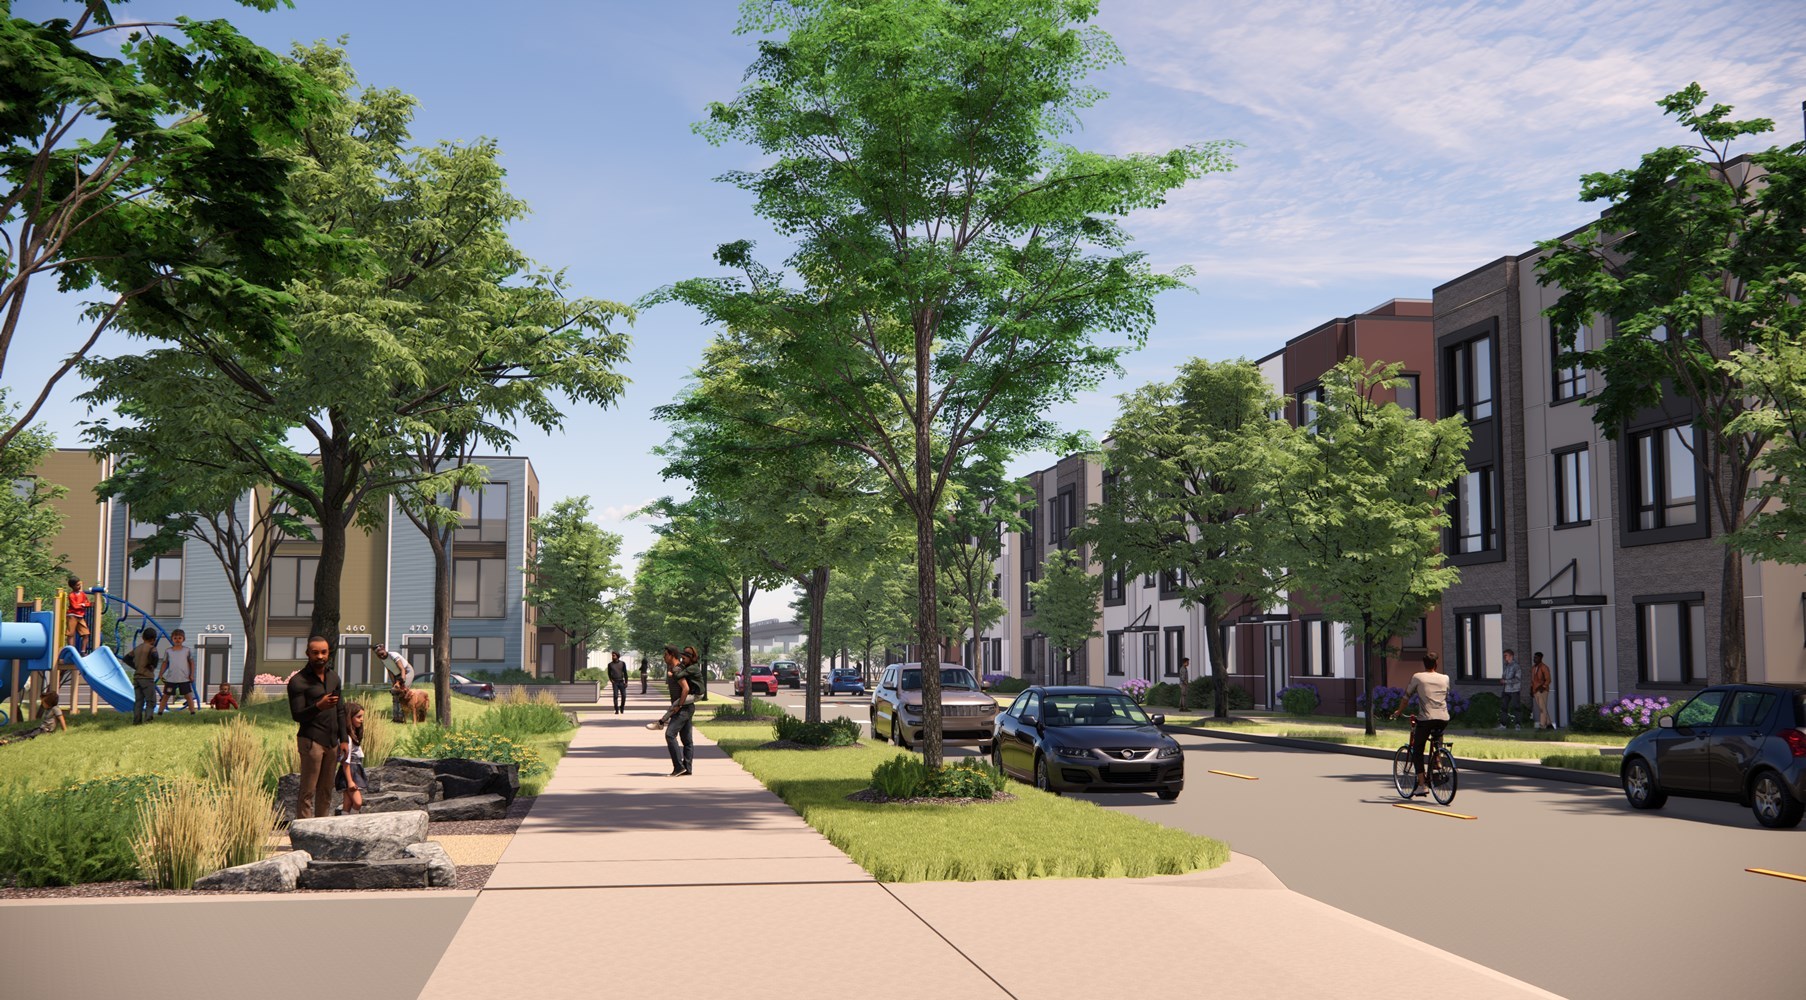 111th Street Station Area Development Concept. A residential tree-lined street lined with homes showing residents walking. The Red Line Extension elevated tracks are seen in the far distance. 